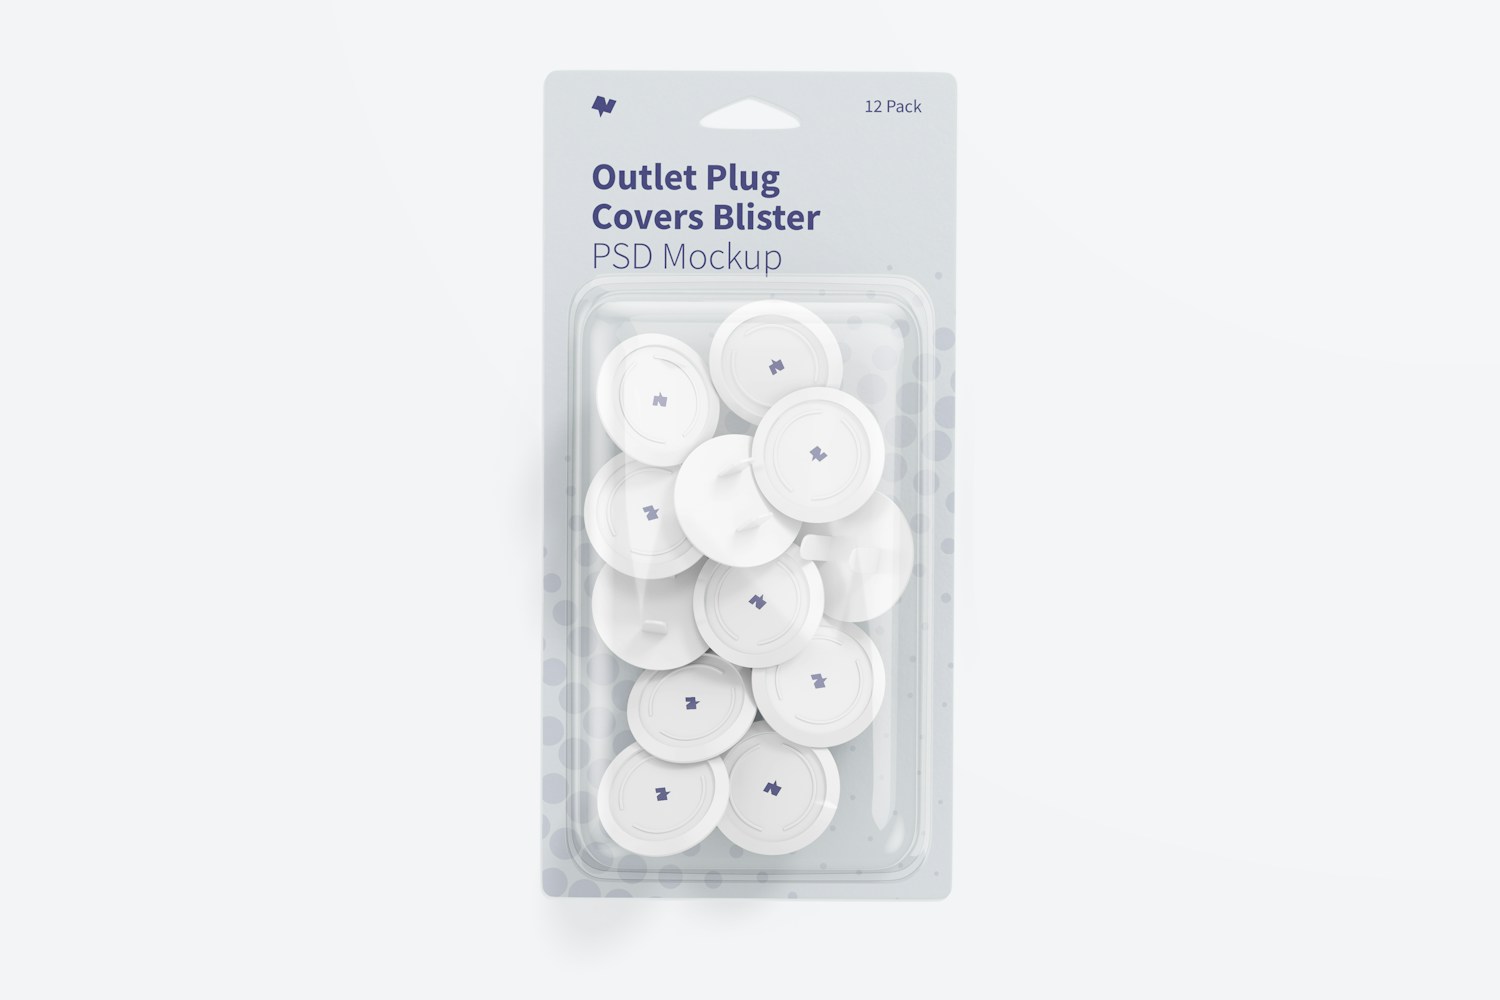 Outlet Plug Covers Blister Mockup